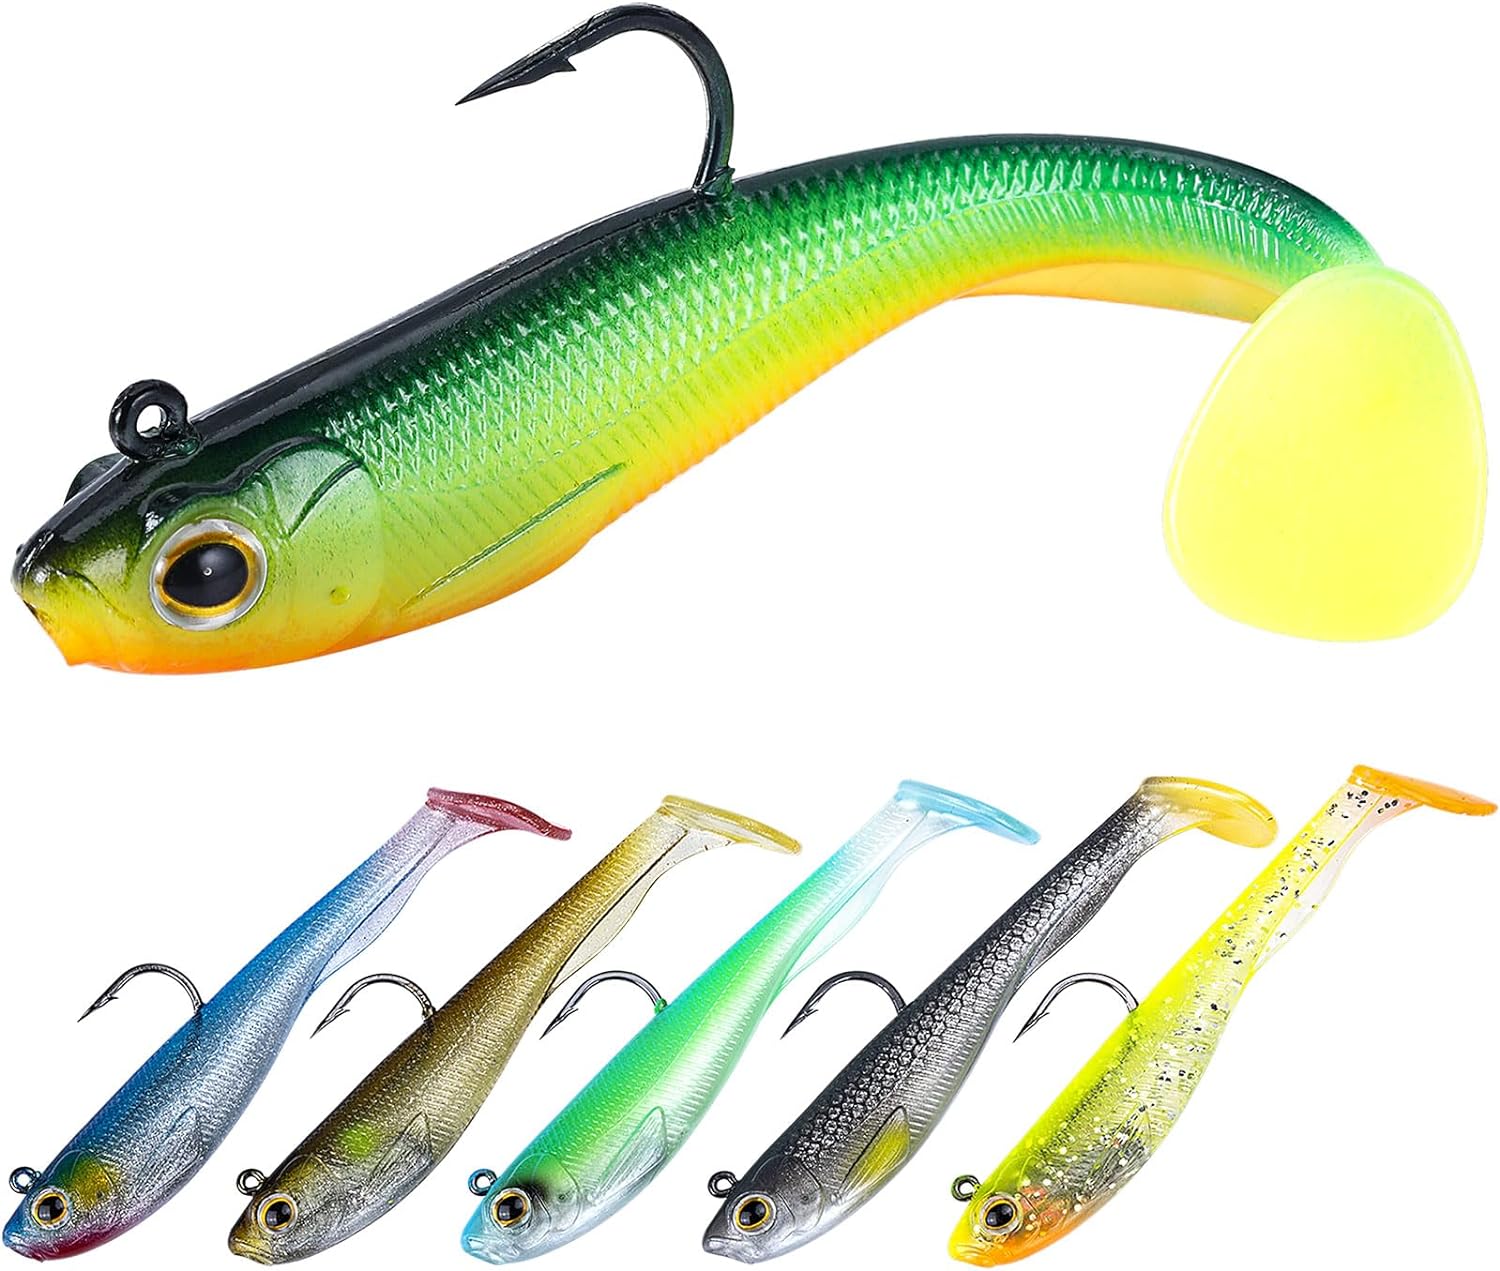 GOANDO Top Water Fishing Lures 5PCS Bass Lures with Propeller Tail Fishing  Gear and Equipment for Bass Trout Catfish Pike Perch Bass Fishing Lure Kit